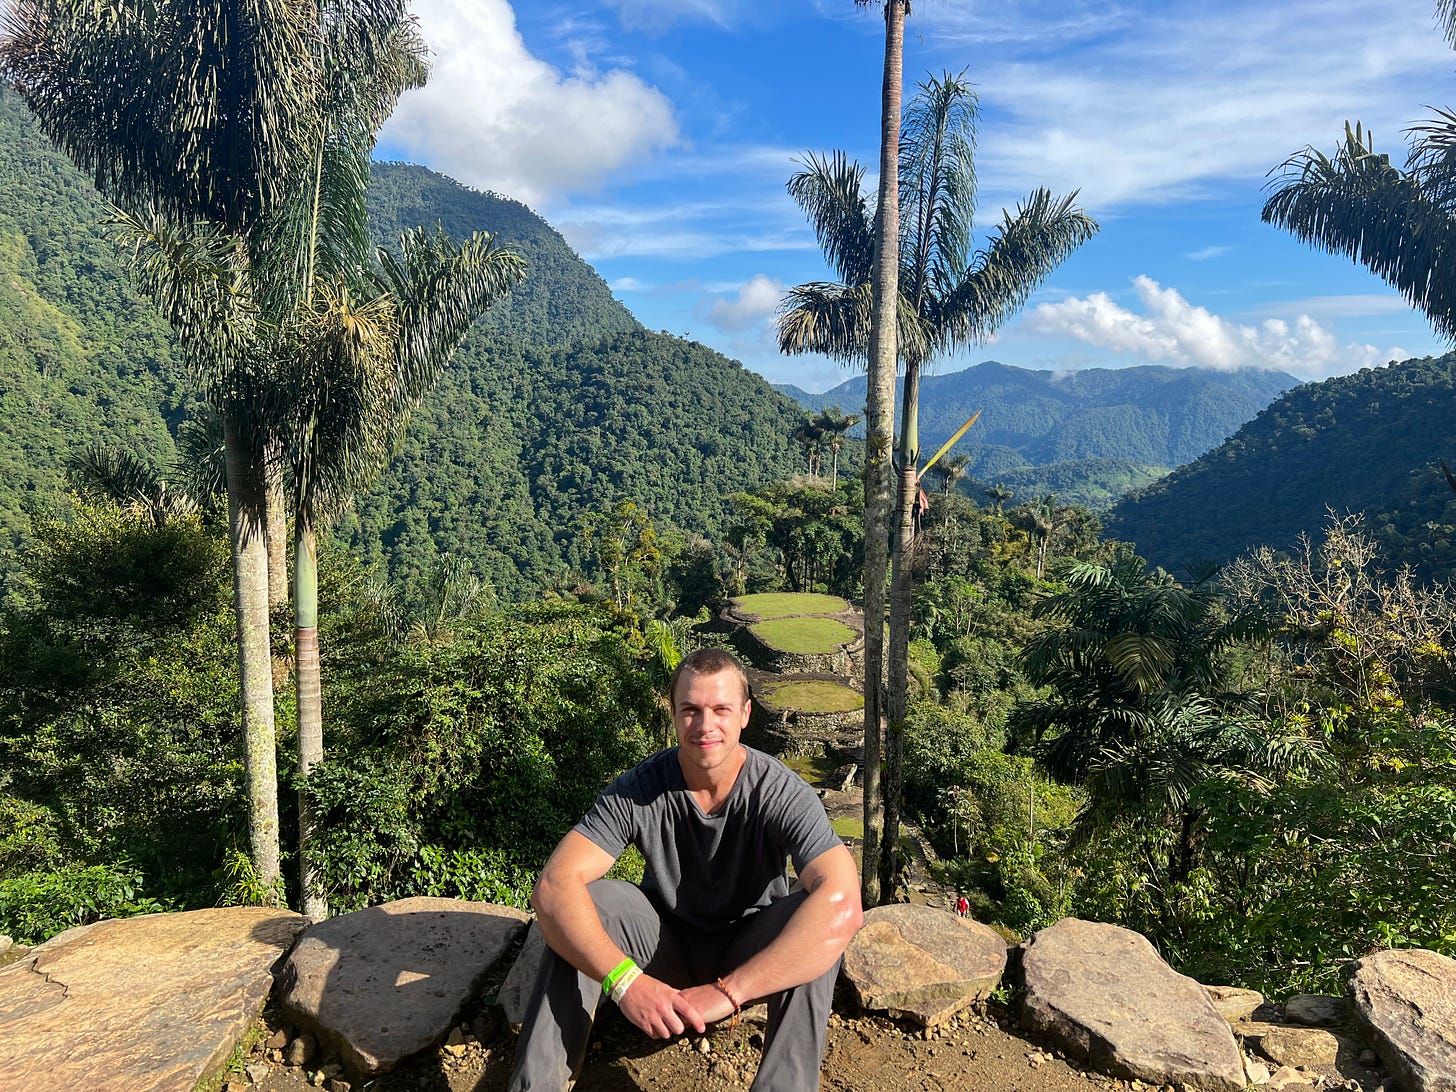 I recently completed a 4-day hike through the Colombian jungle to the Lost City, the 1,200-year-old capital of the indigenous Tairona people.